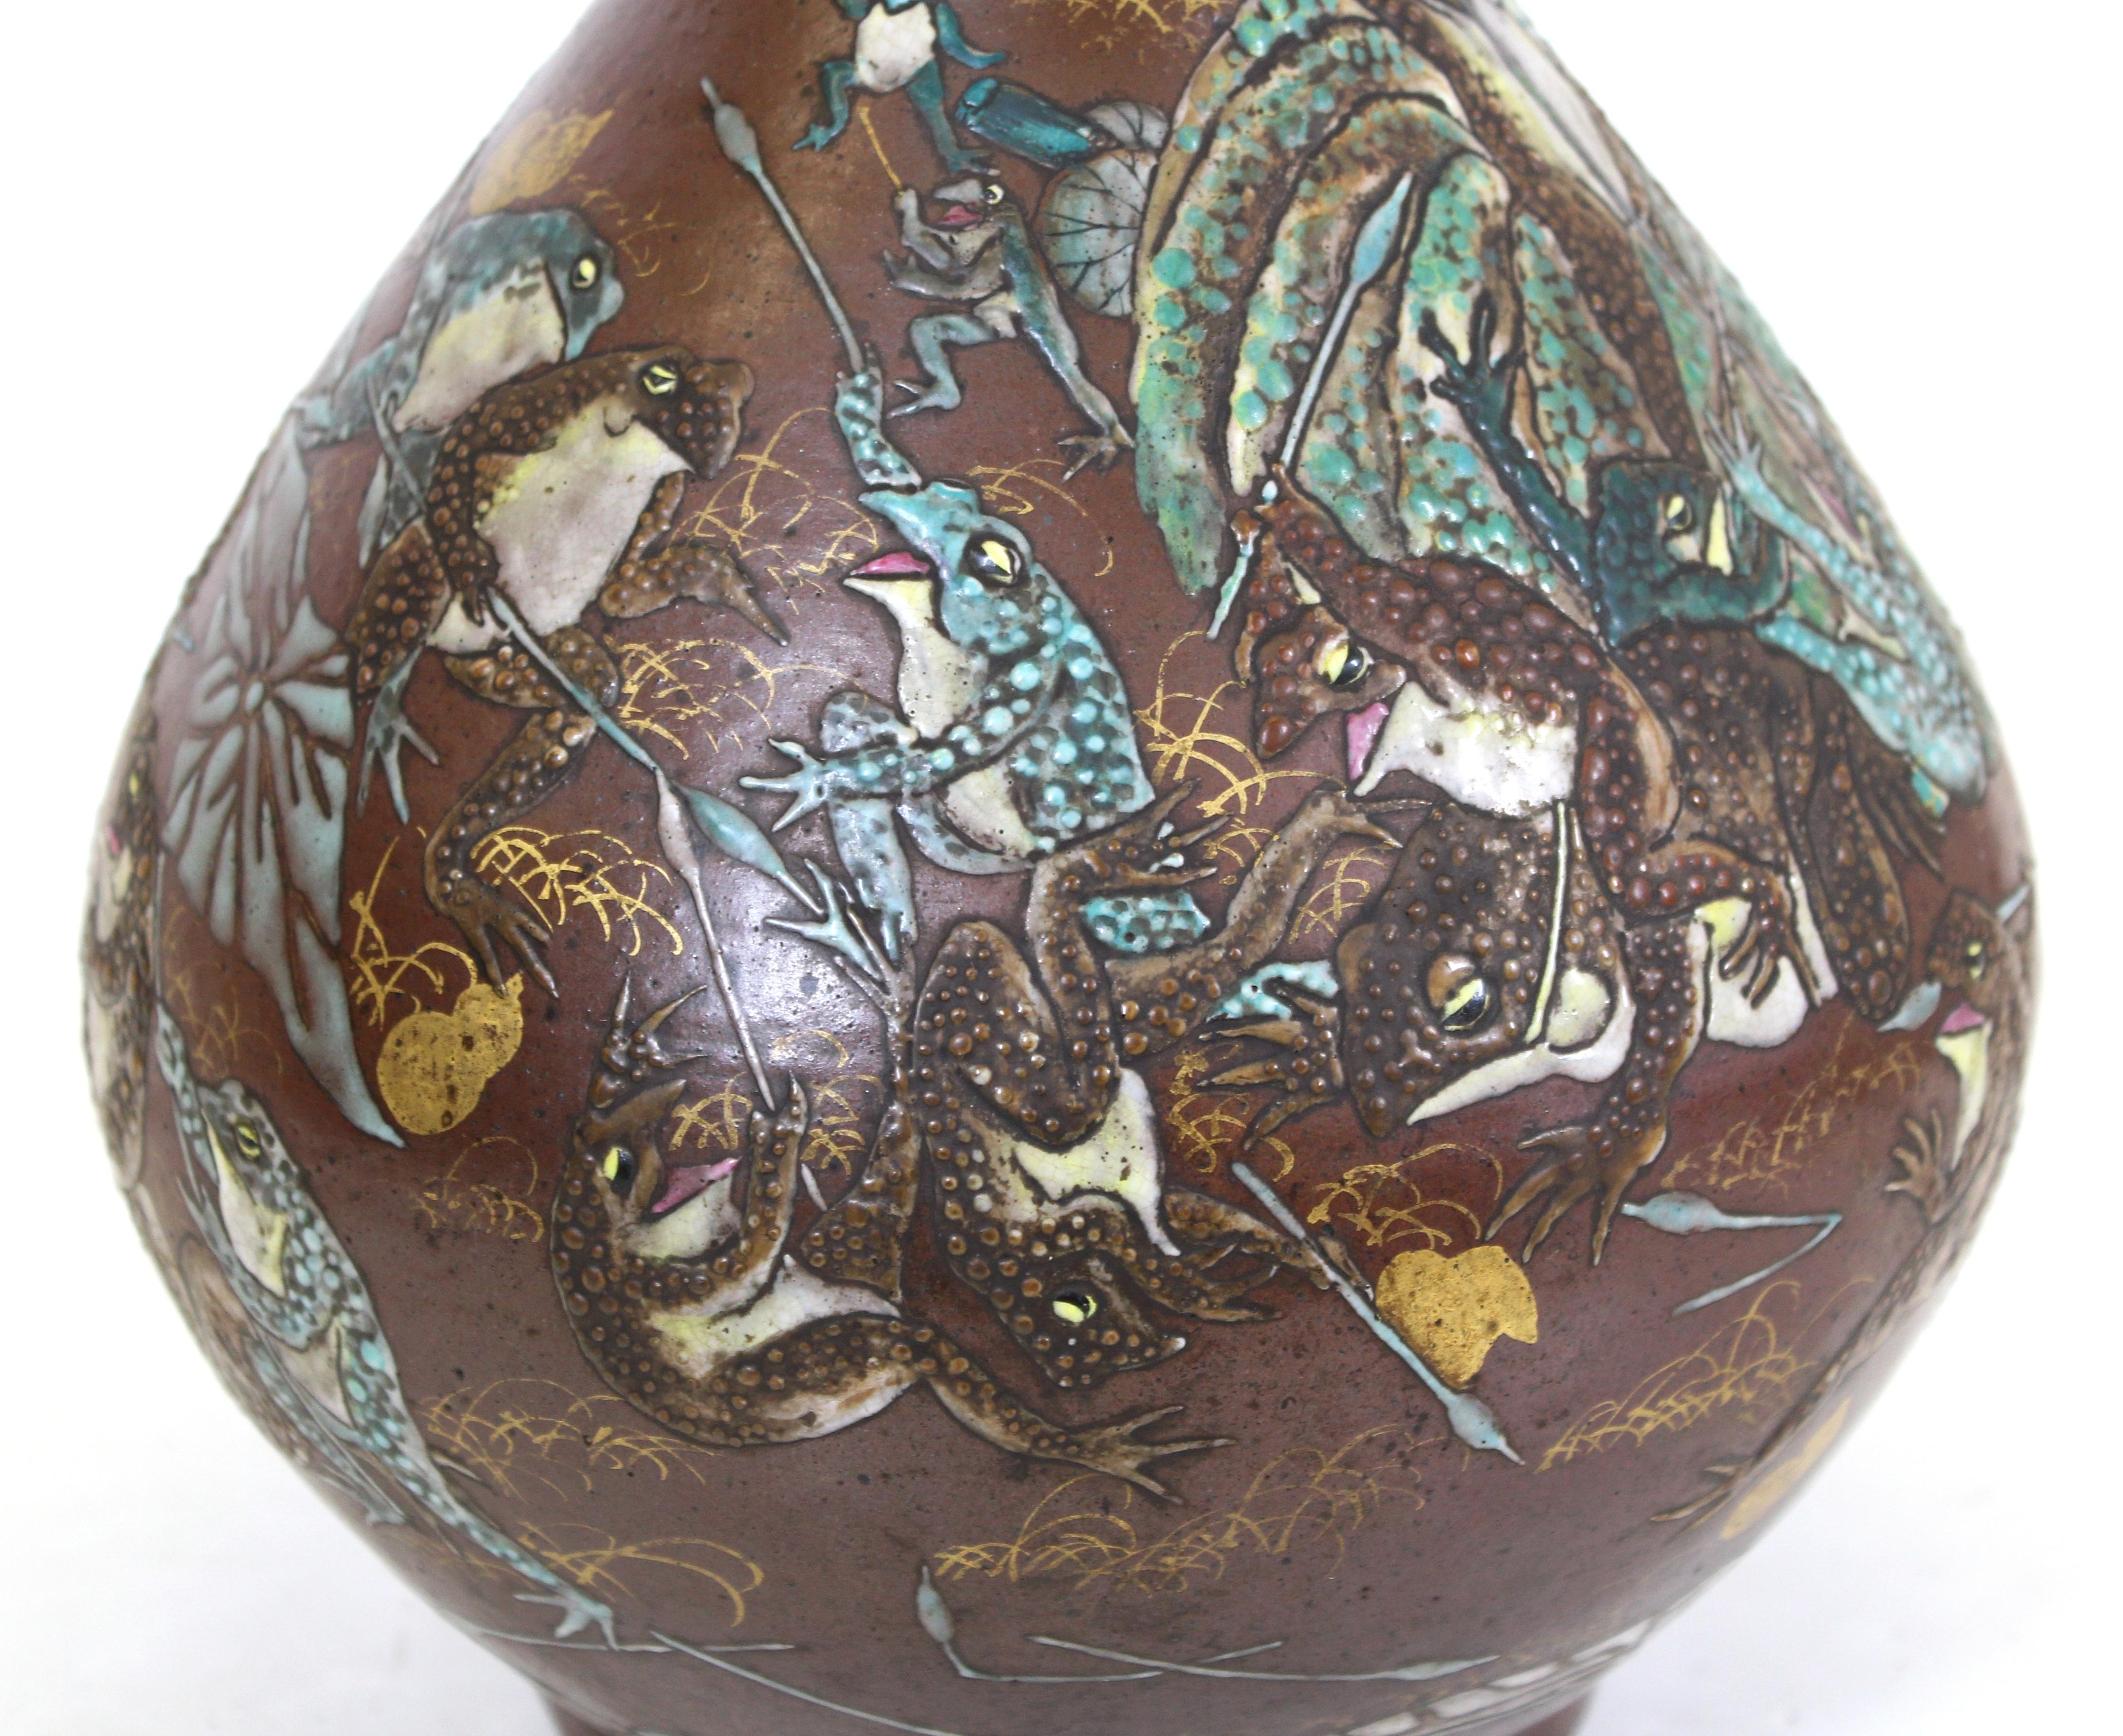 Early 20th Century Japanese Meiji Satsuma Vase with Frogs at War